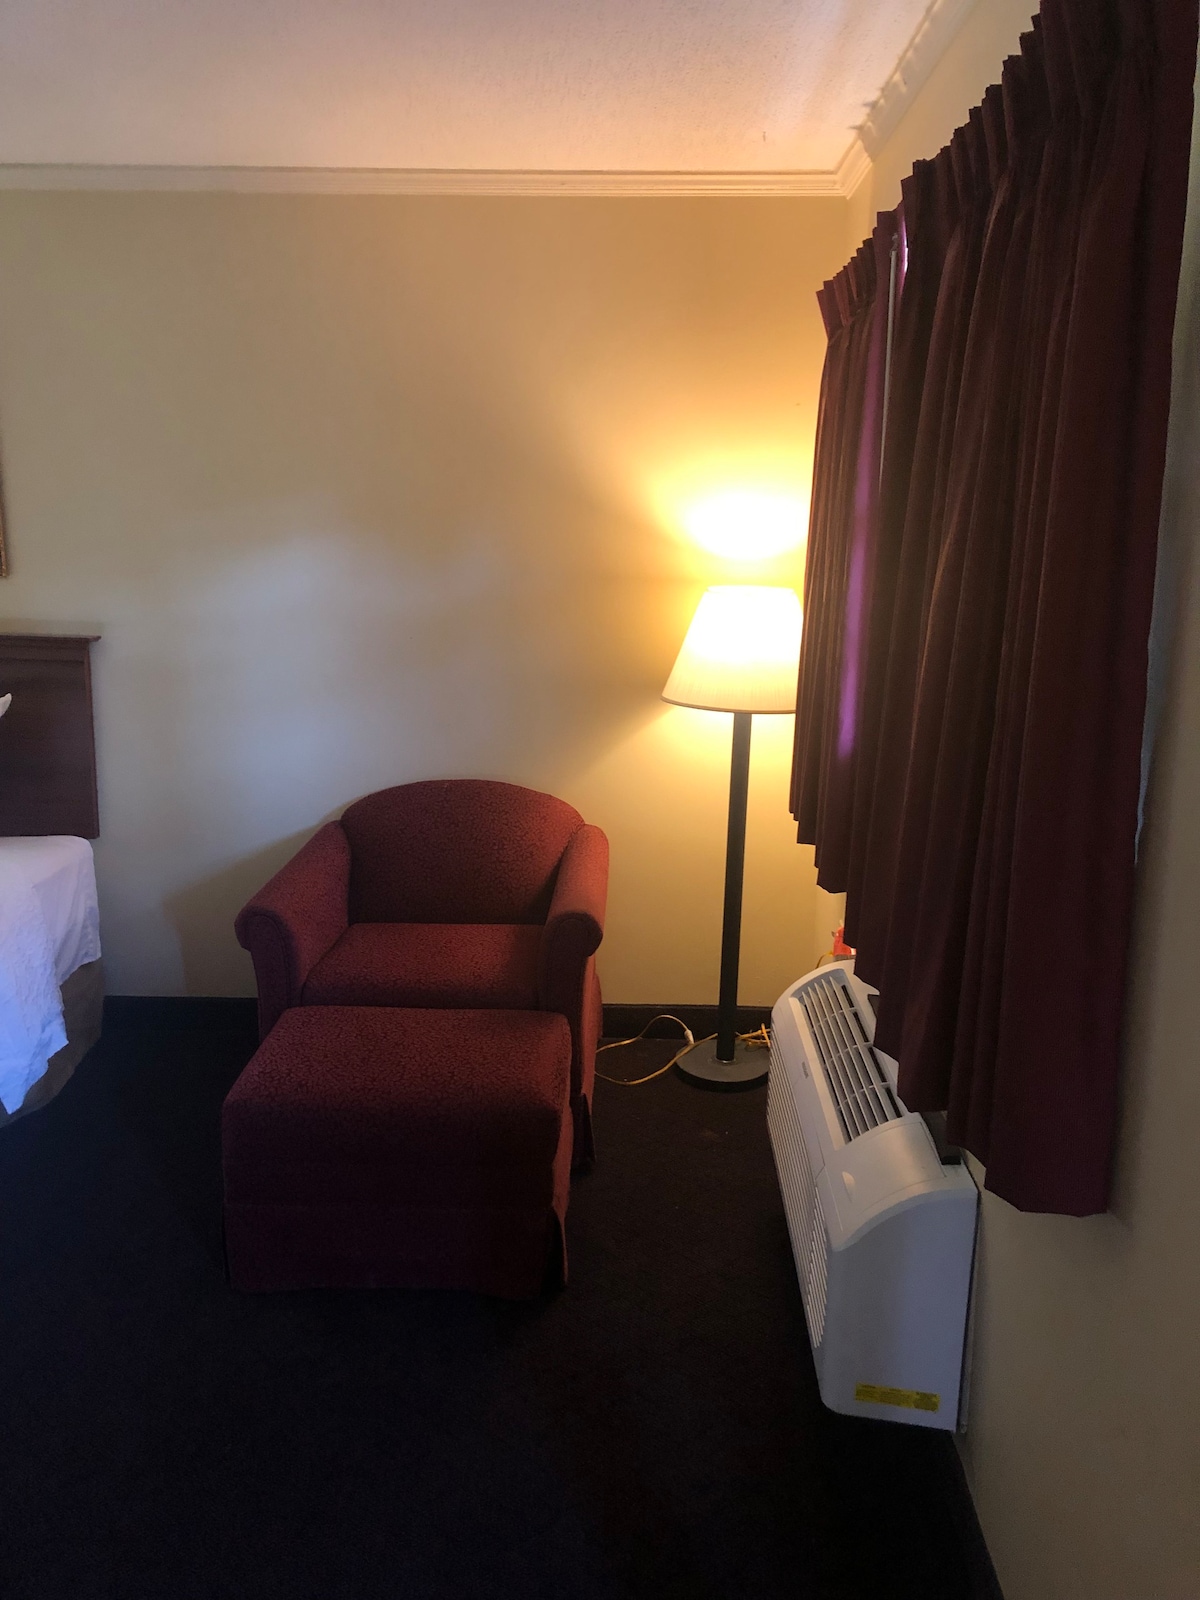 2 bed 1 bath extended stay motel room